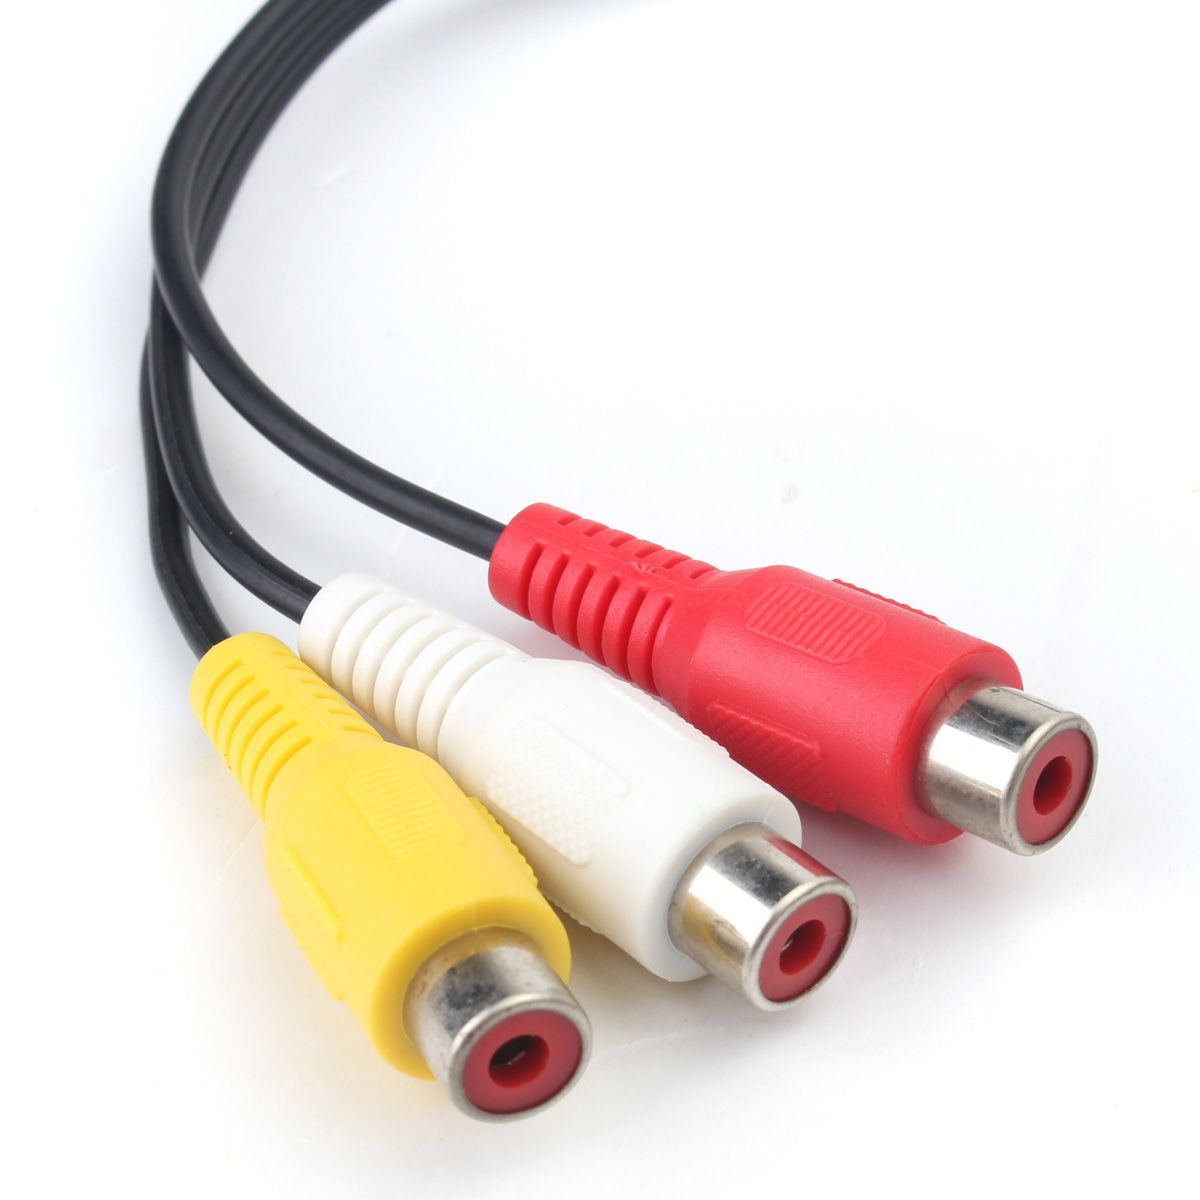 35mm-Mini-AV-Male-To-3-RCA-Female-Audio-Video-Cable-Stereo-Jack-Adapter-Cord-1111434